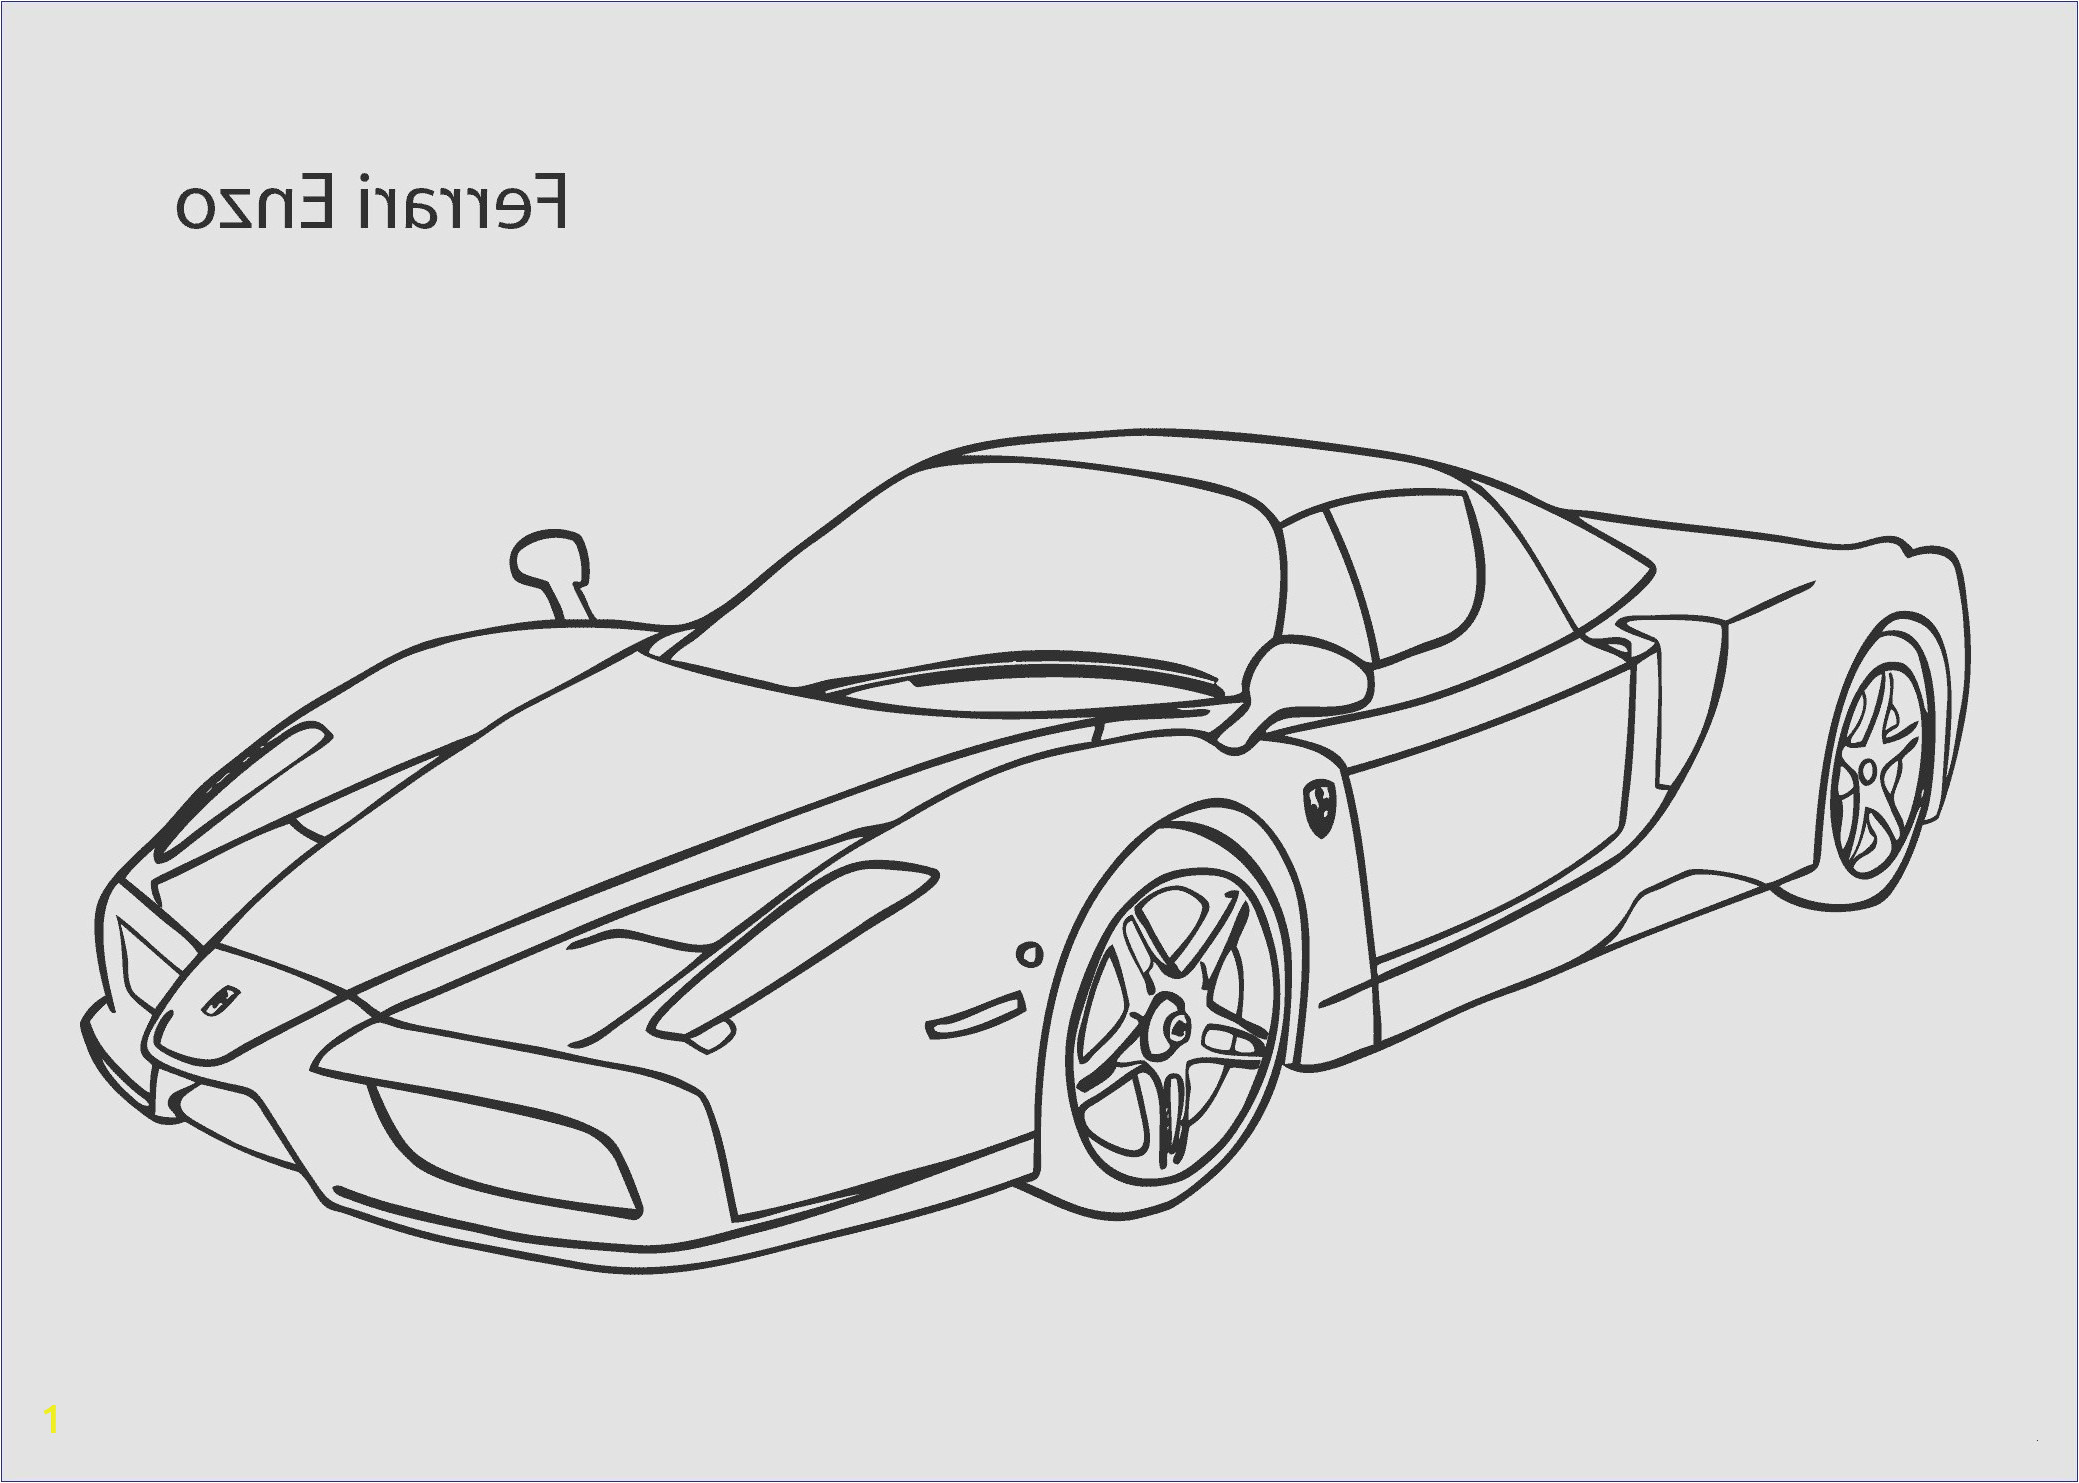 car coloring page to print beautiful stock lovely walt disney cars coloring pages dazhou of car coloring page to print